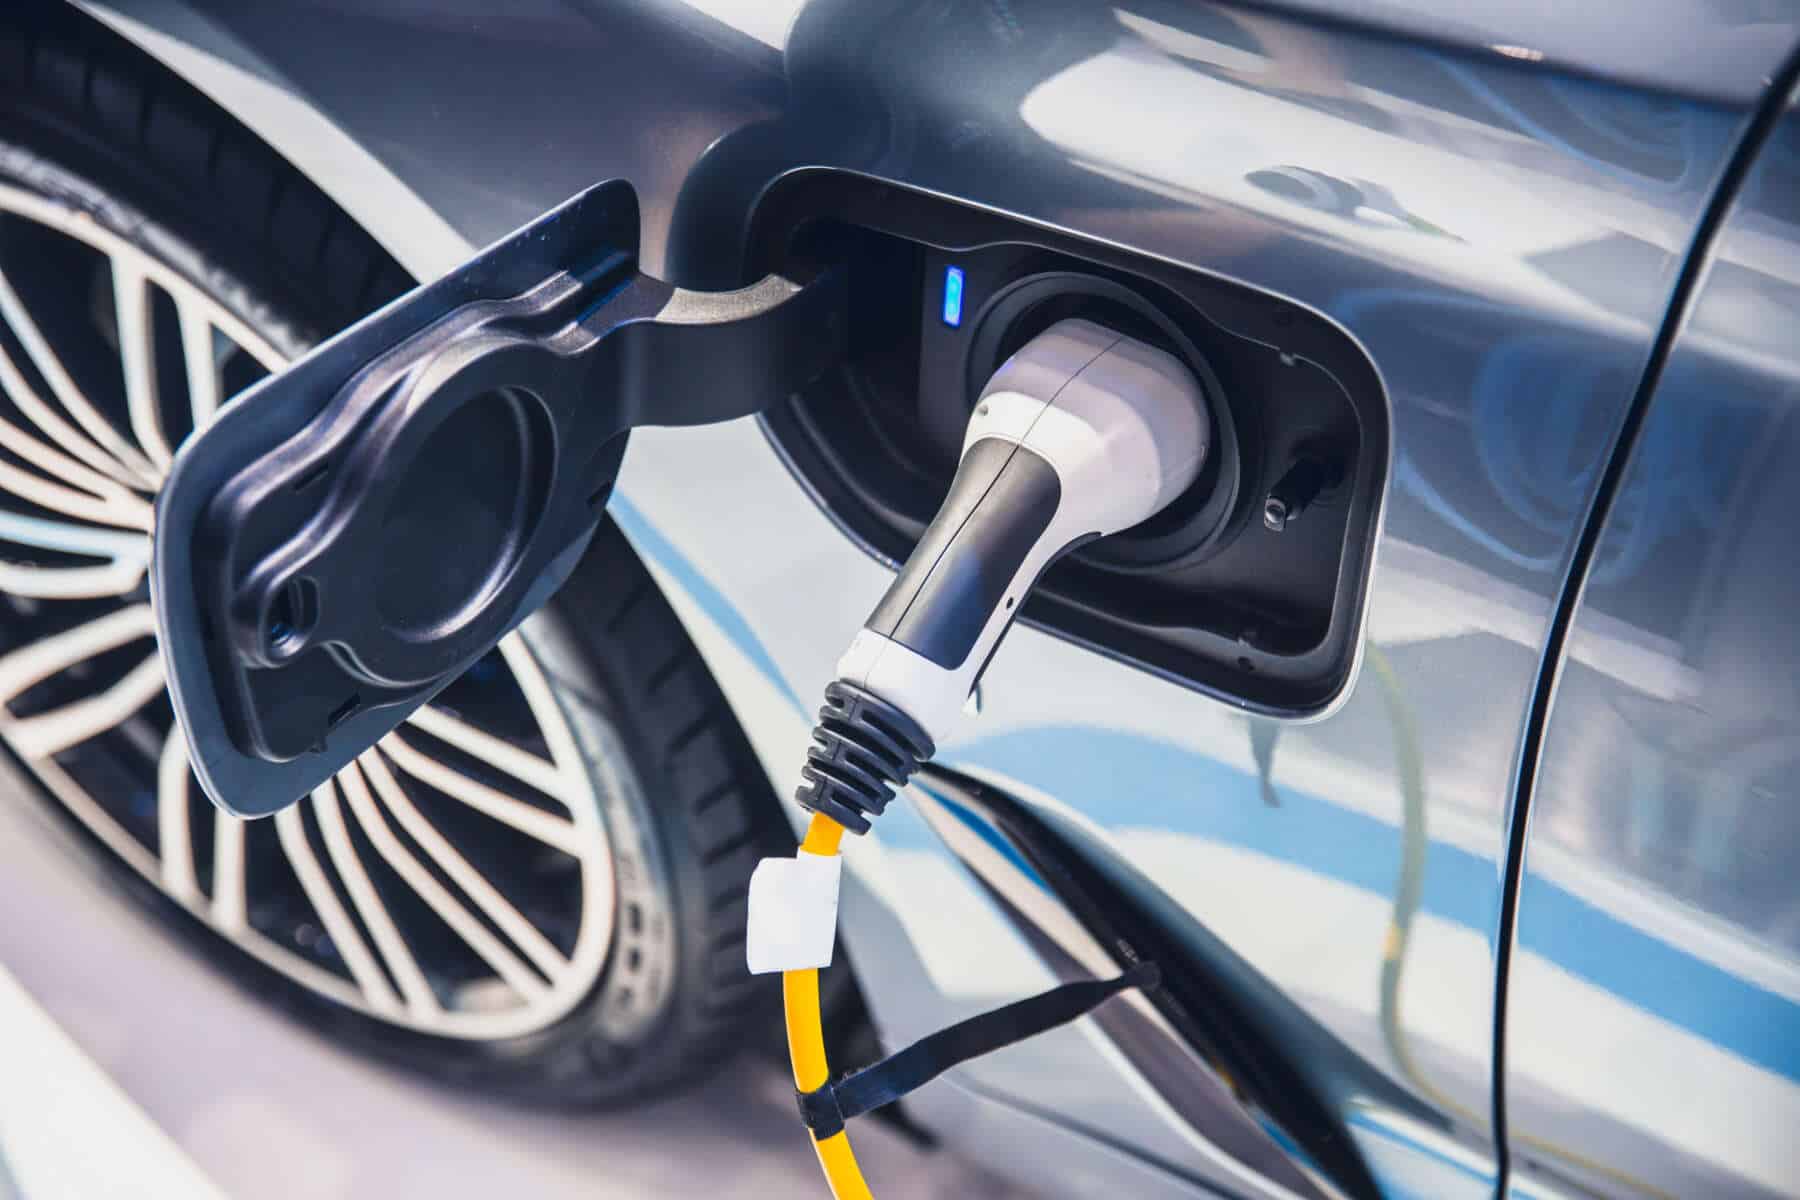 Rhode Island News: As California Sales Surge, Is DRIVE EV Program Boosting Electric Vehicle Purchases in RI?